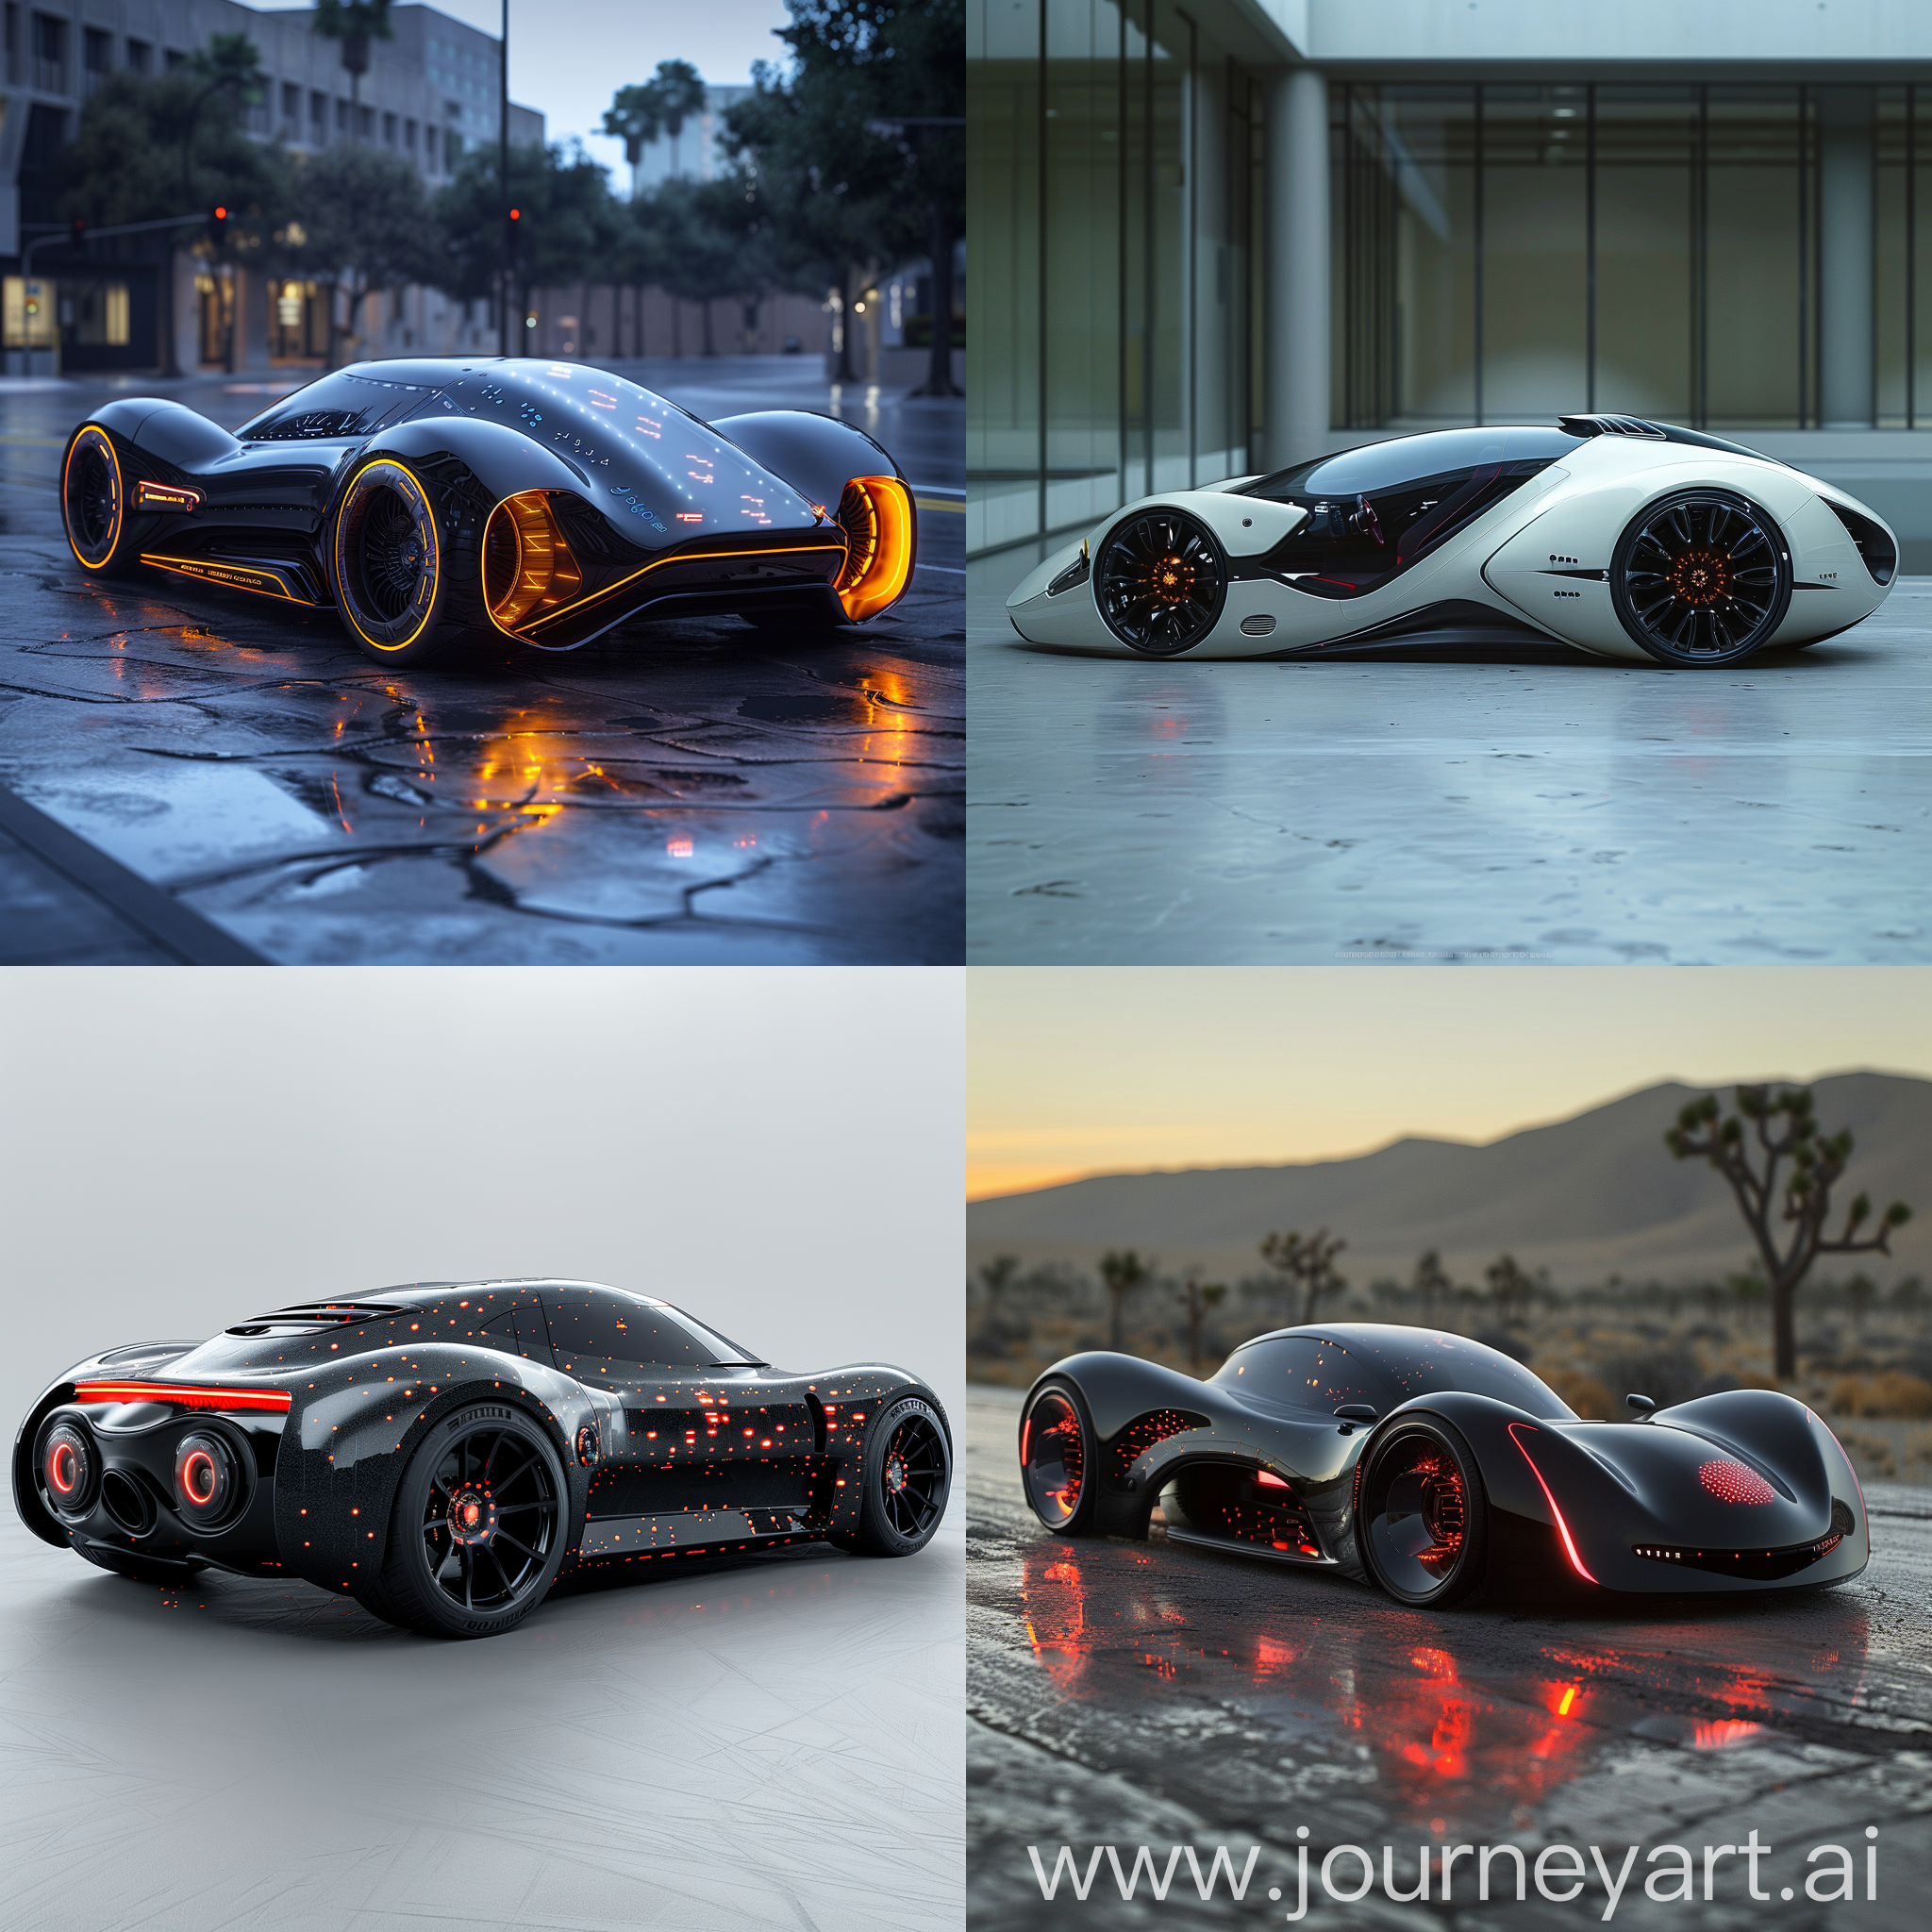 Futuristic car, futuristic features, futuristic impact-resistant features, Autonomous Driving, Augmented Reality Navigation, Vehicle-to-Vehicle Communication (V2V), Holographic Displays, Biometric Authentication, Driver Health Monitoring, Advanced Climate Control, Shape-Shifting Interiors, Self-Healing Materials, Sustainable Power Sources, Adaptive Graphene Skin, Self-Inflating Panels, Shape-Memory Alloys, Microlattice Structures, Active Roll Cages, Ejectable Seats with Parachutes (for Flying Cars), Crumple Zones on Steroids, AI-powered Pre-Collision Systems, Self-Sealing Tires, Biometric Injury Detection, octane render --stylize 1000